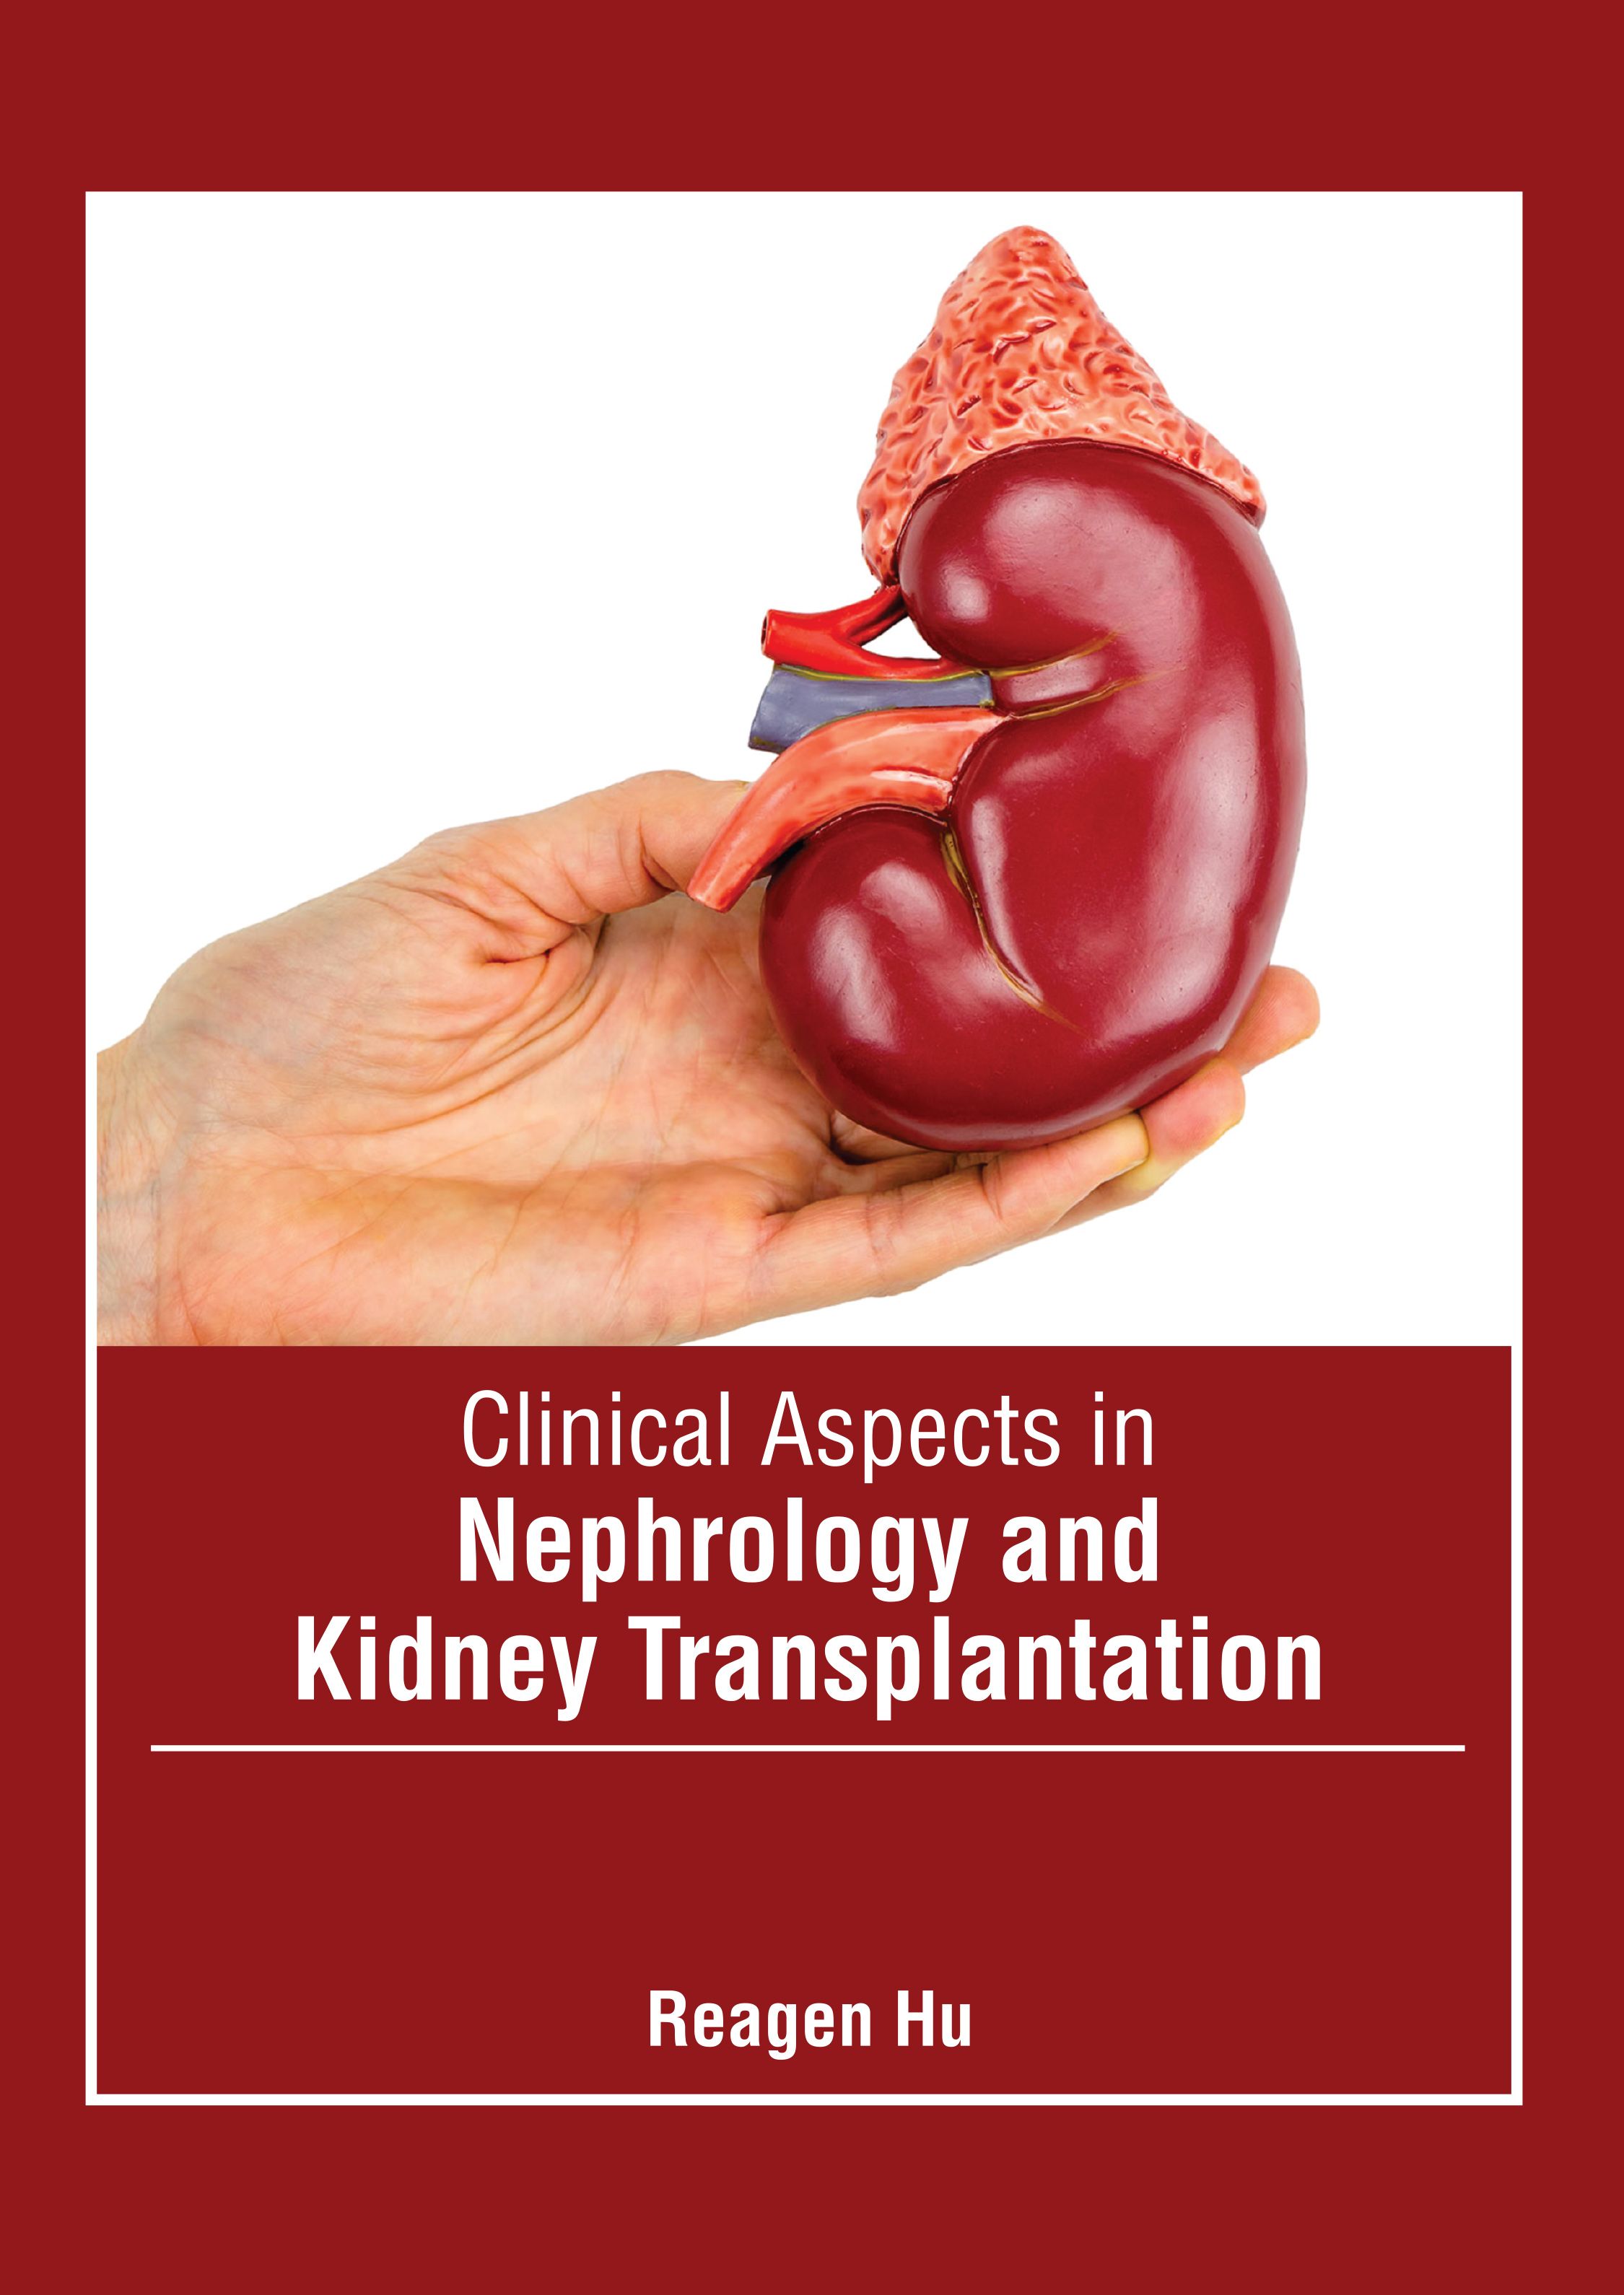 exclusive-publishers/american-medical-publishers/clinical-aspects-in-nephrology-and-kidney-transplantation-9781639276318